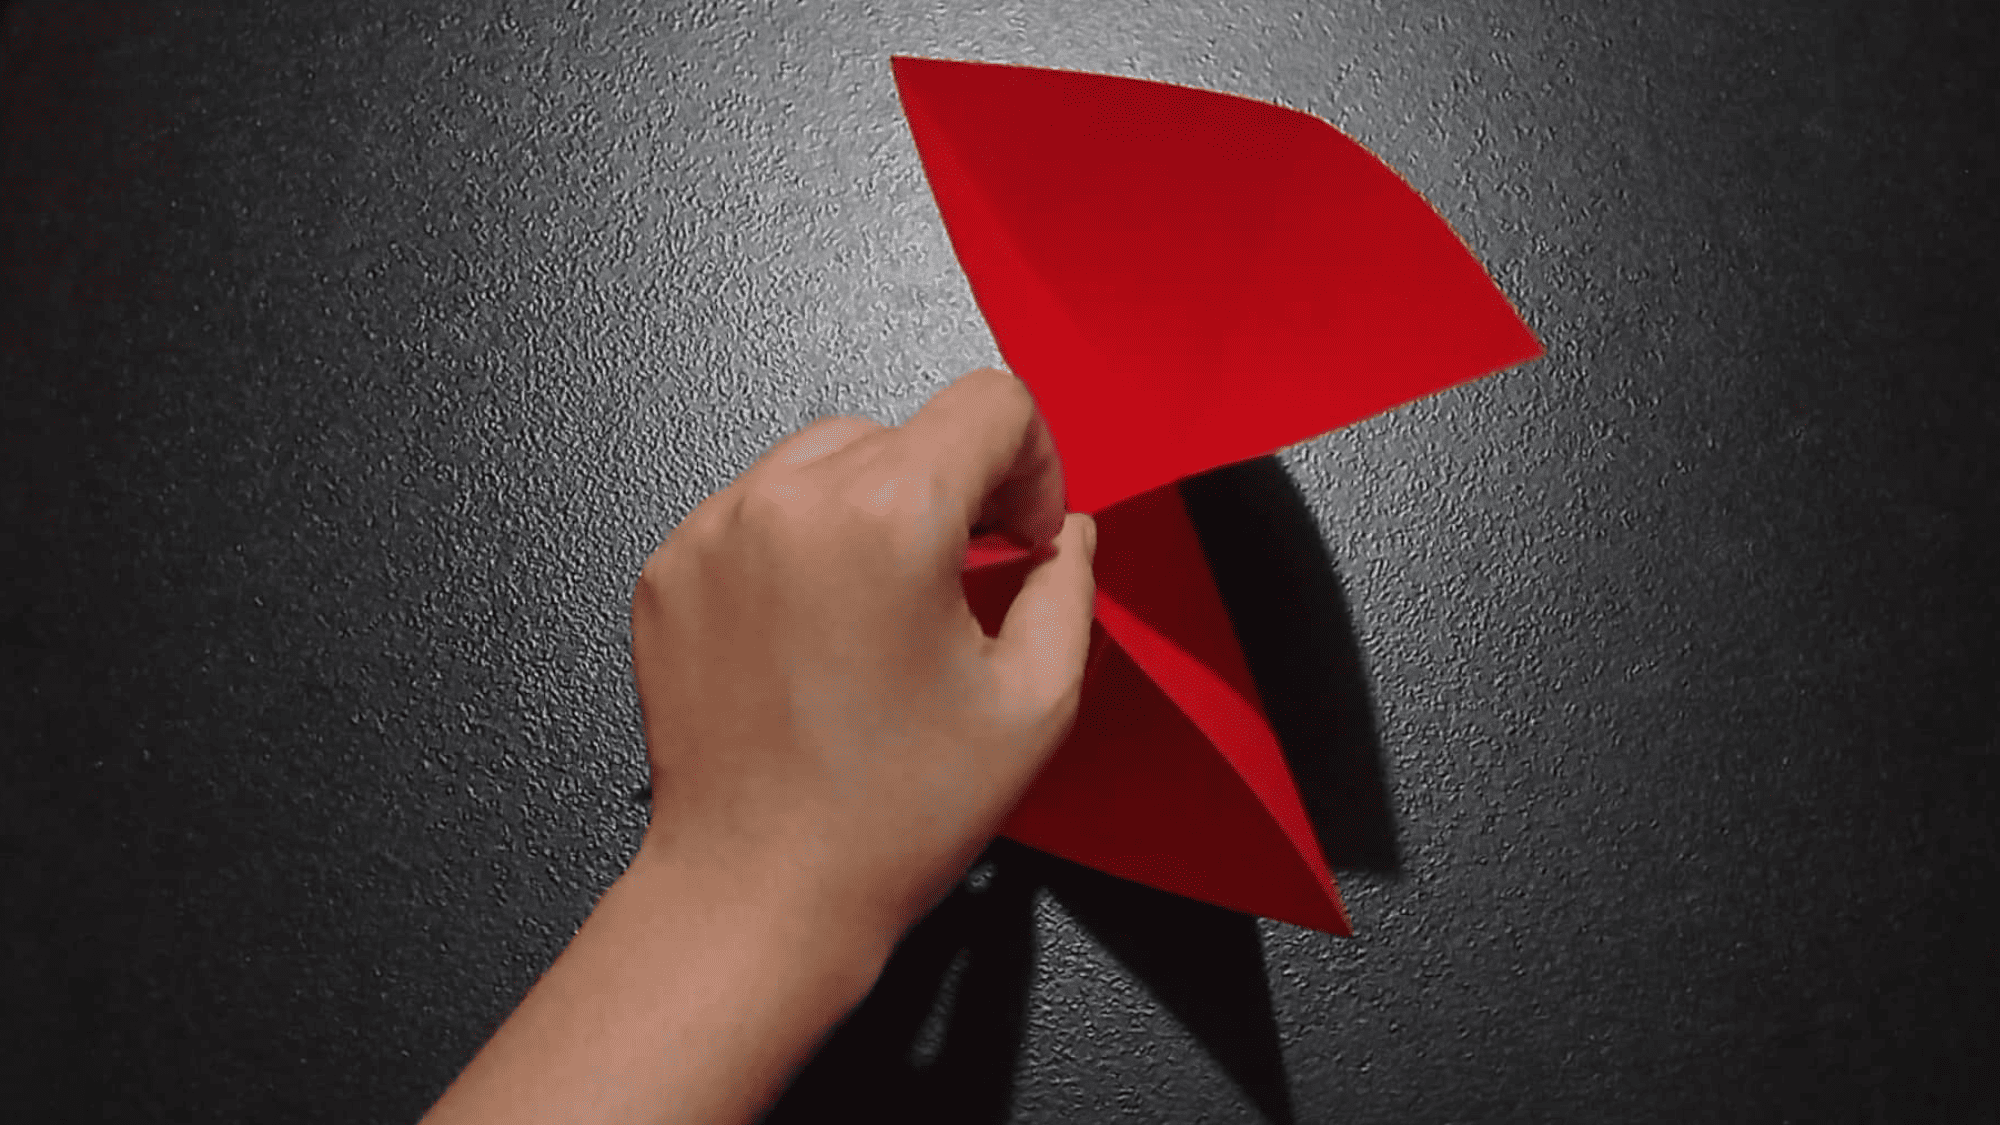 origami rose instructions step 6.1